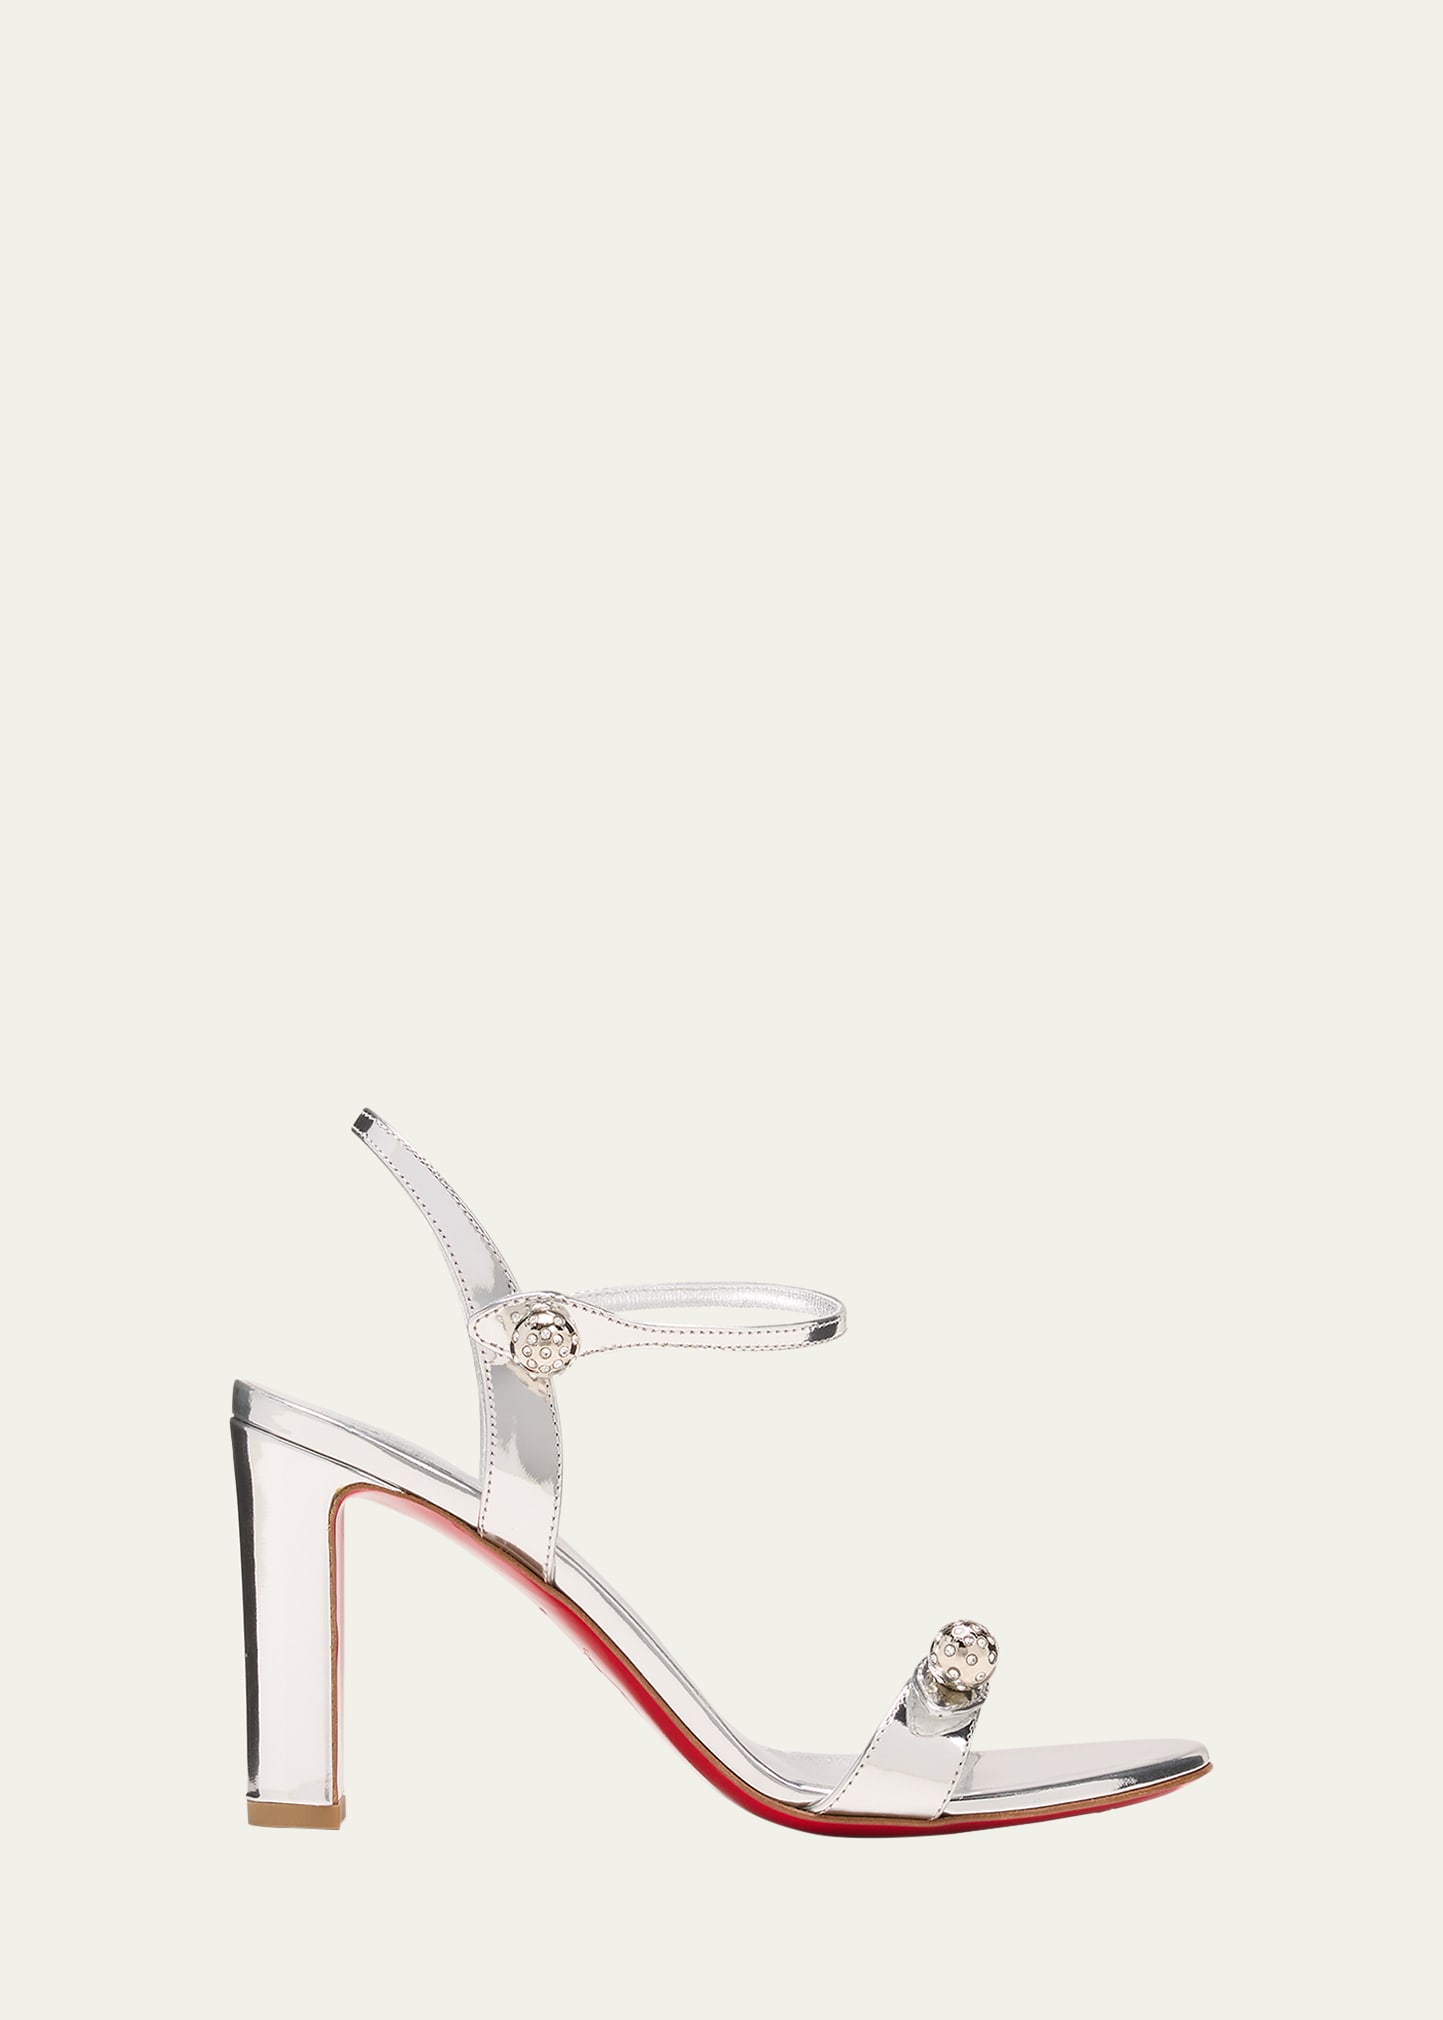 Christian Louboutin Atmospheria Metallic Sphere Red Sole Sandals In White